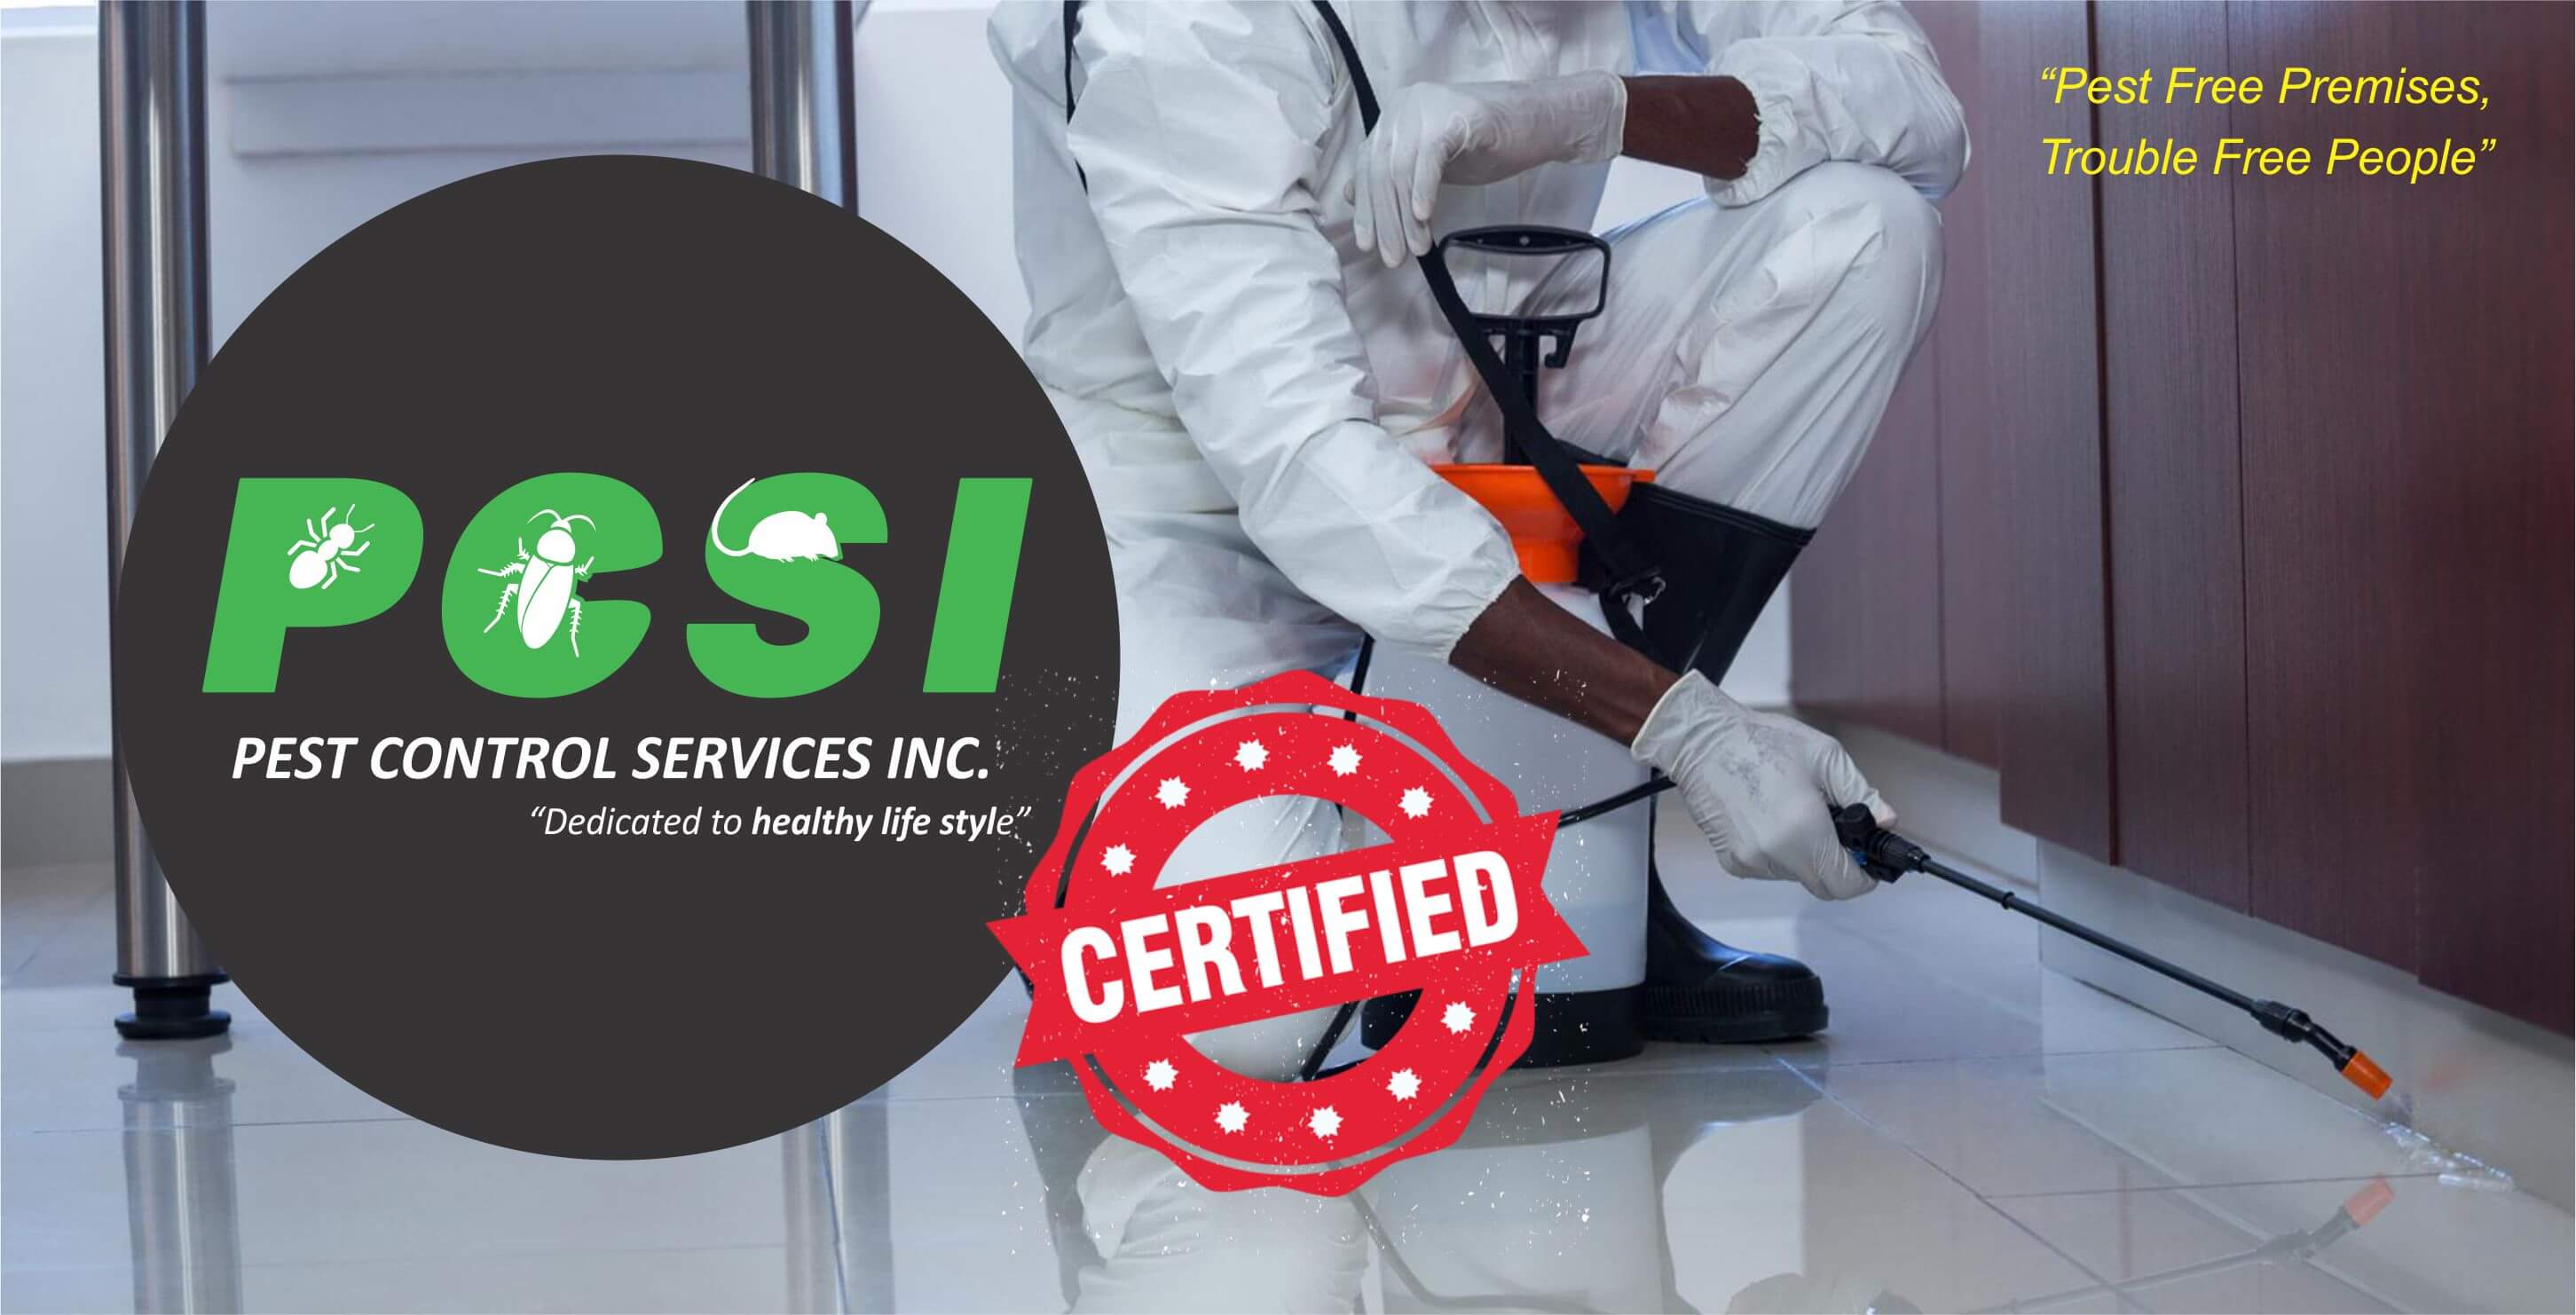 pest control certified company in Indore mp India